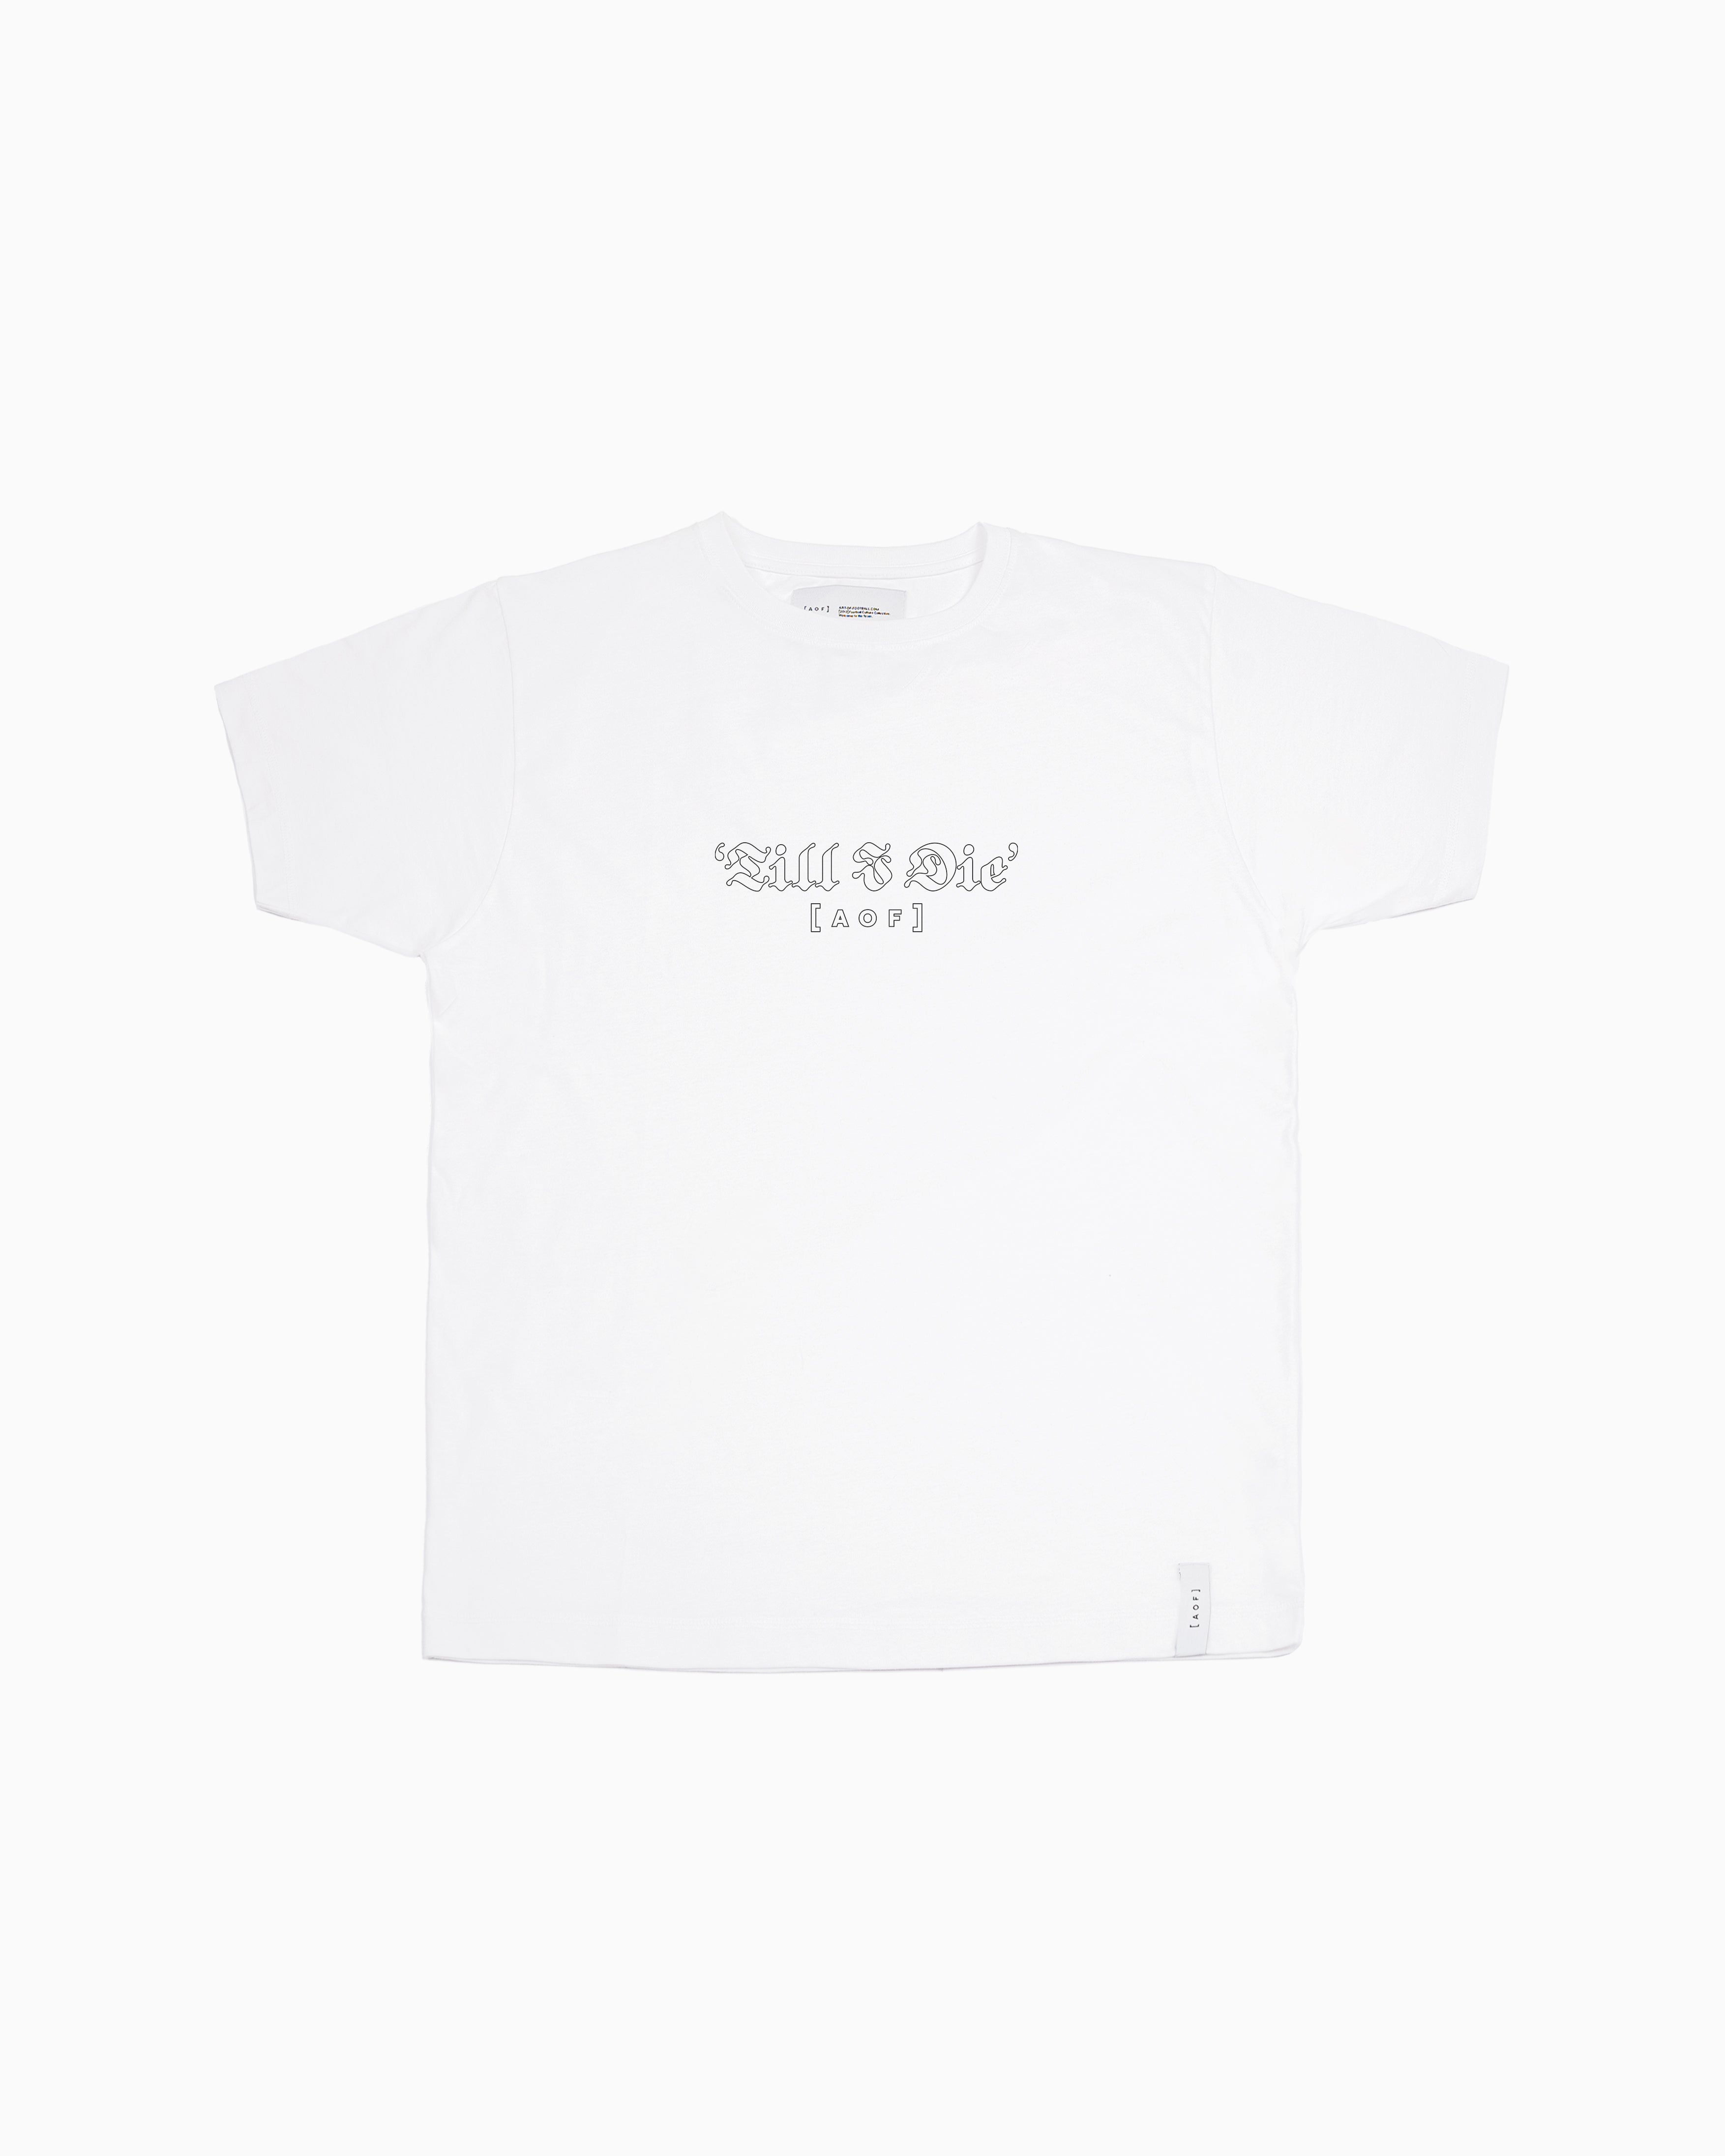 Wolves 'Till I Die' - Tee or Sweat